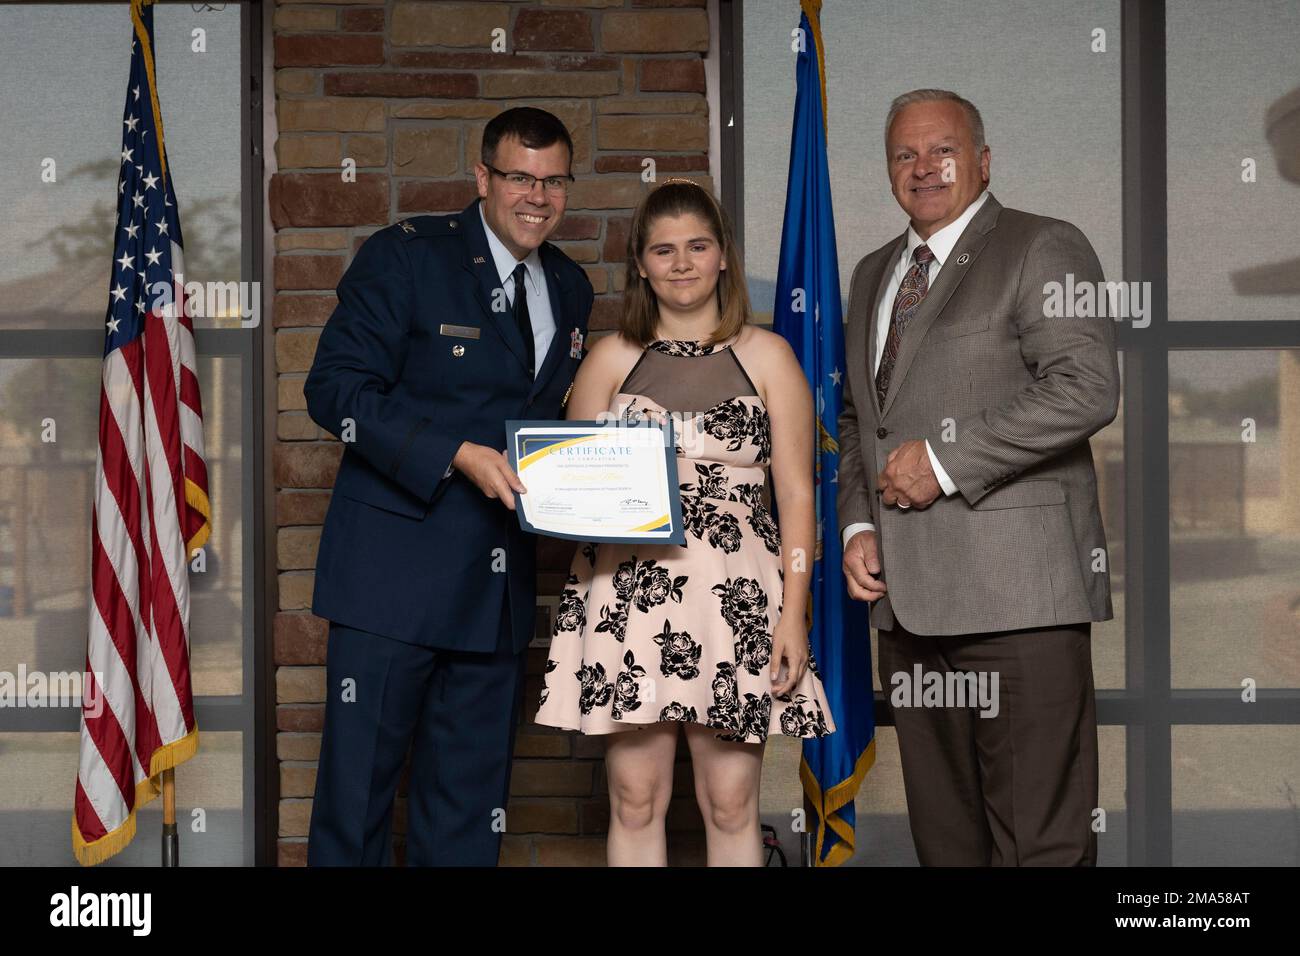 Destiny Mote, Project SEARCH intern, receives graduation certificate, May 24, 2022, on Holloman Air Force Base, New Mexico. Project SEARCH is a year-long internship to help intellectually disabled high school graduates develop job skills. Stock Photo